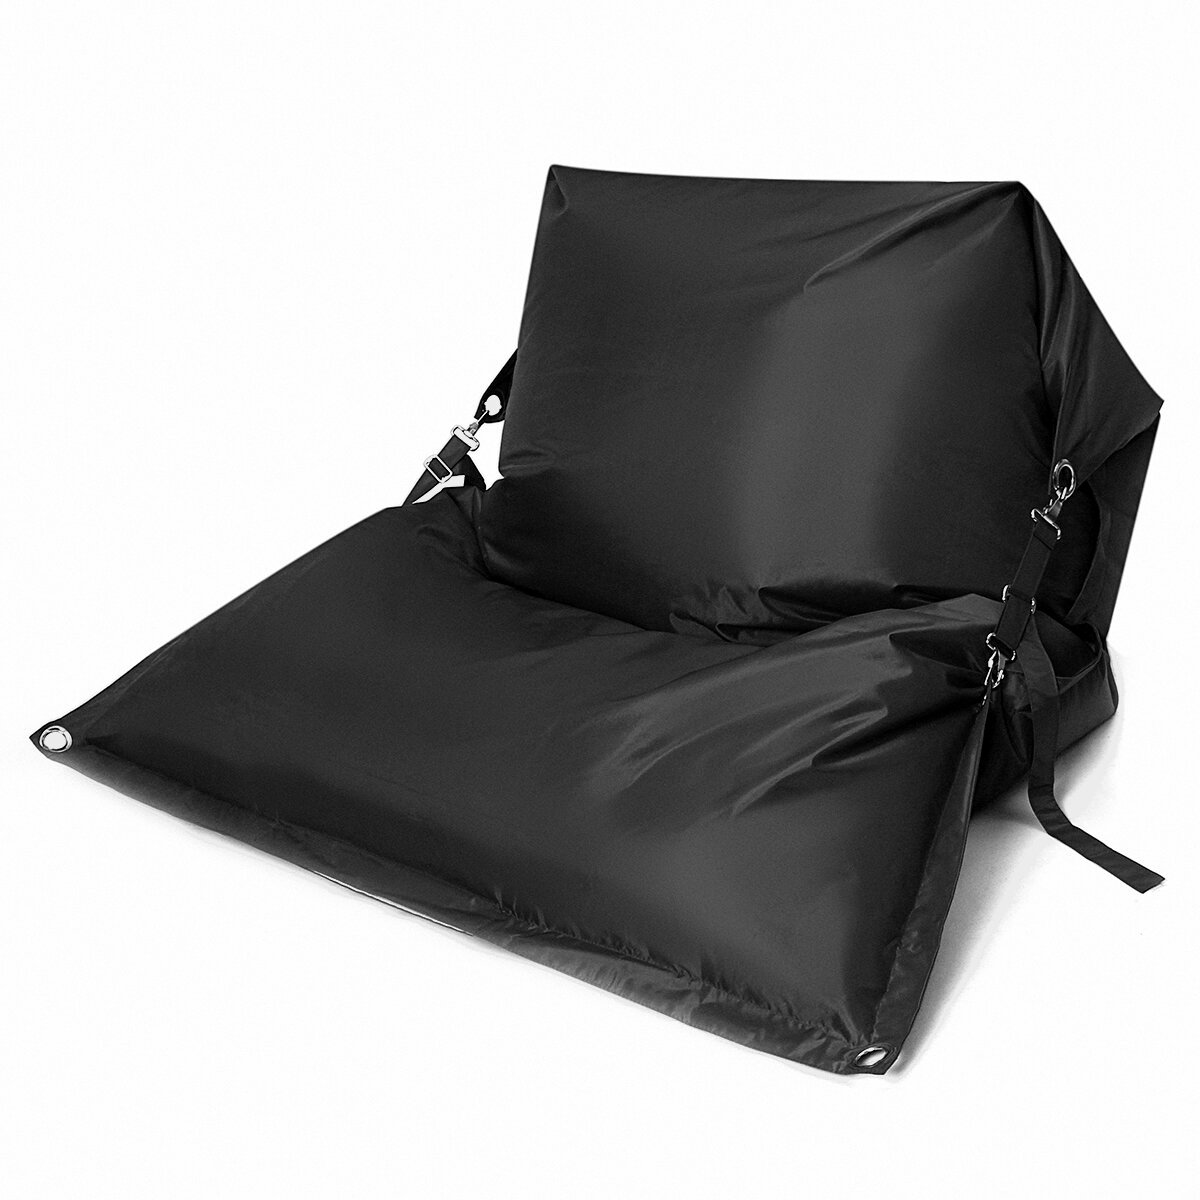 2 Seats Bean Bag Cover Chair Bed Lazy Lounger Cushion Pillow Indoor Outdoor Withou Filling, Banggood  - buy with discount